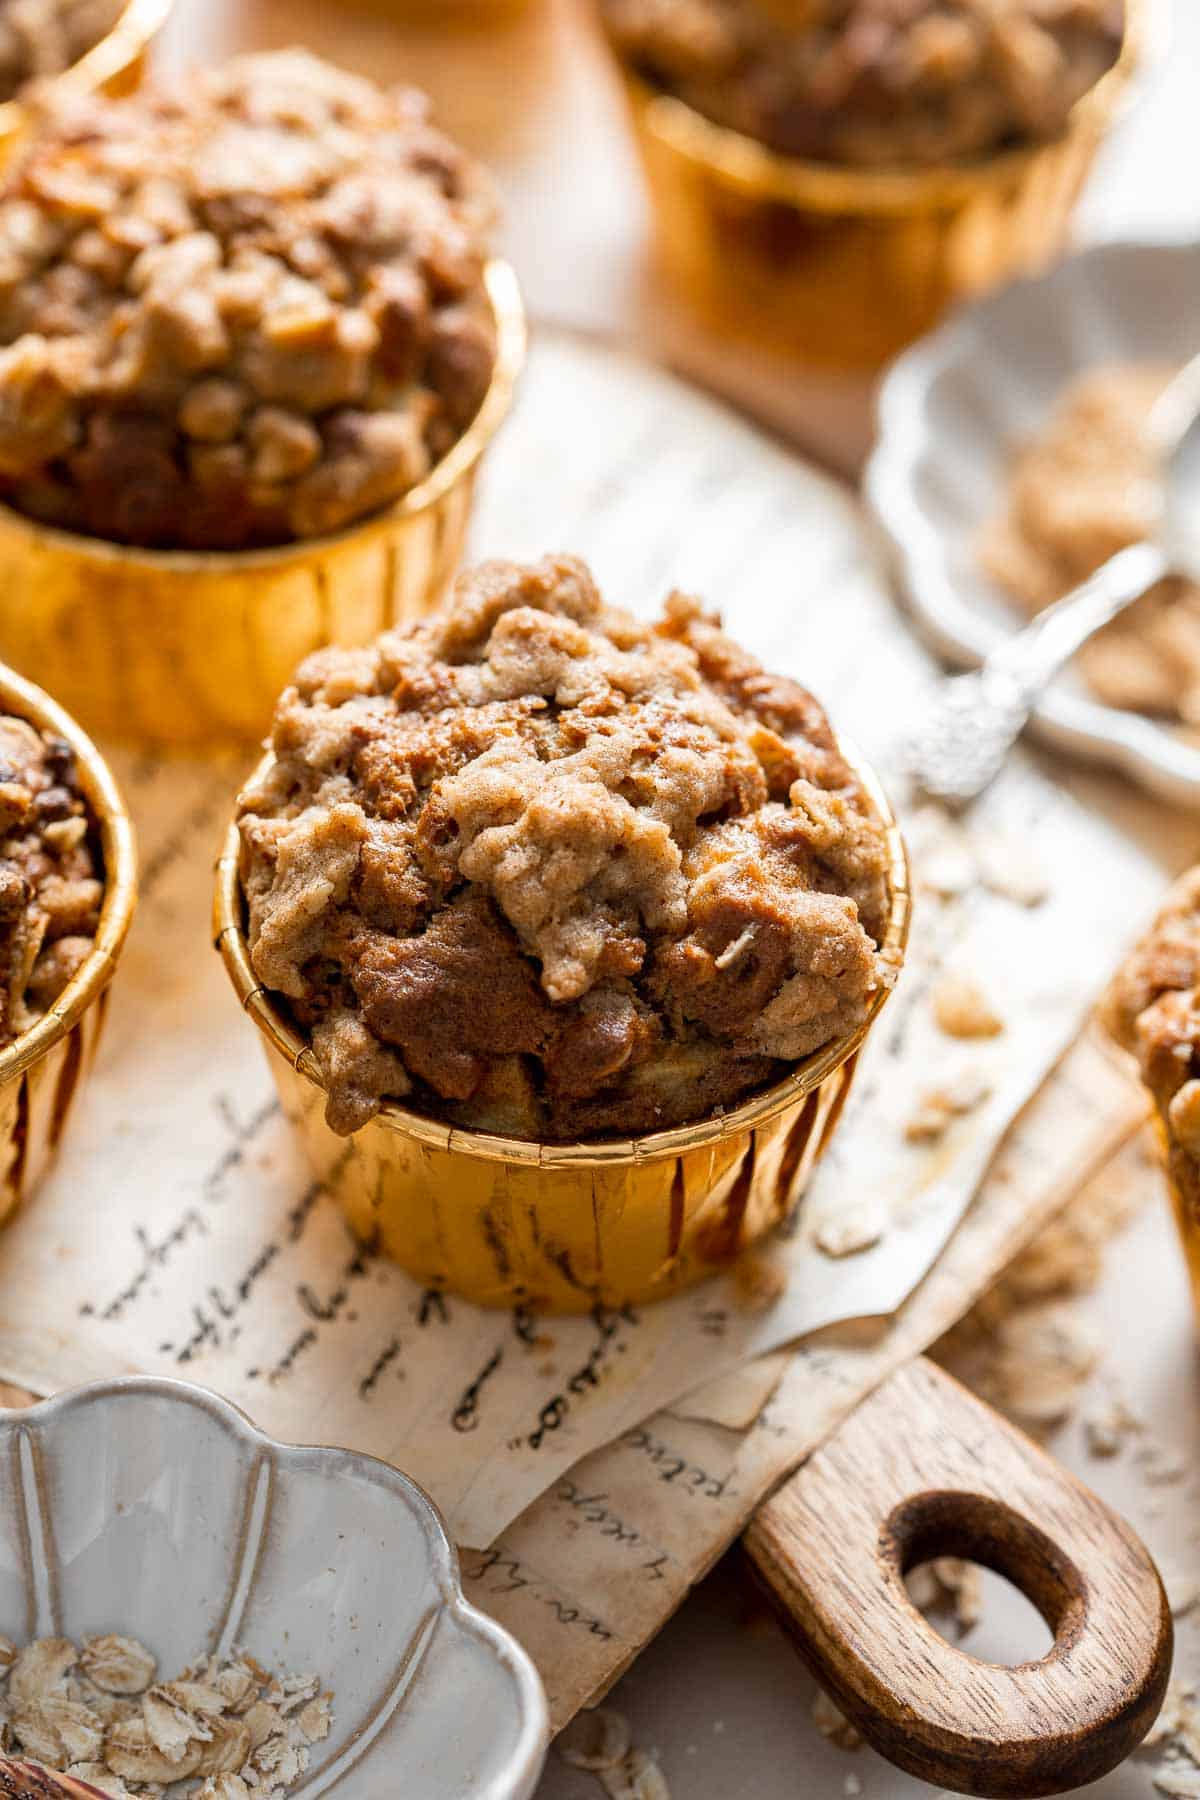 Cinnamon Apple Oatmeal Muffins are fast, easy and delicious— loaded with apples, oats, and fall spices. A quick nutritious bite for breakfast or snack time. | aheadofthyme.com